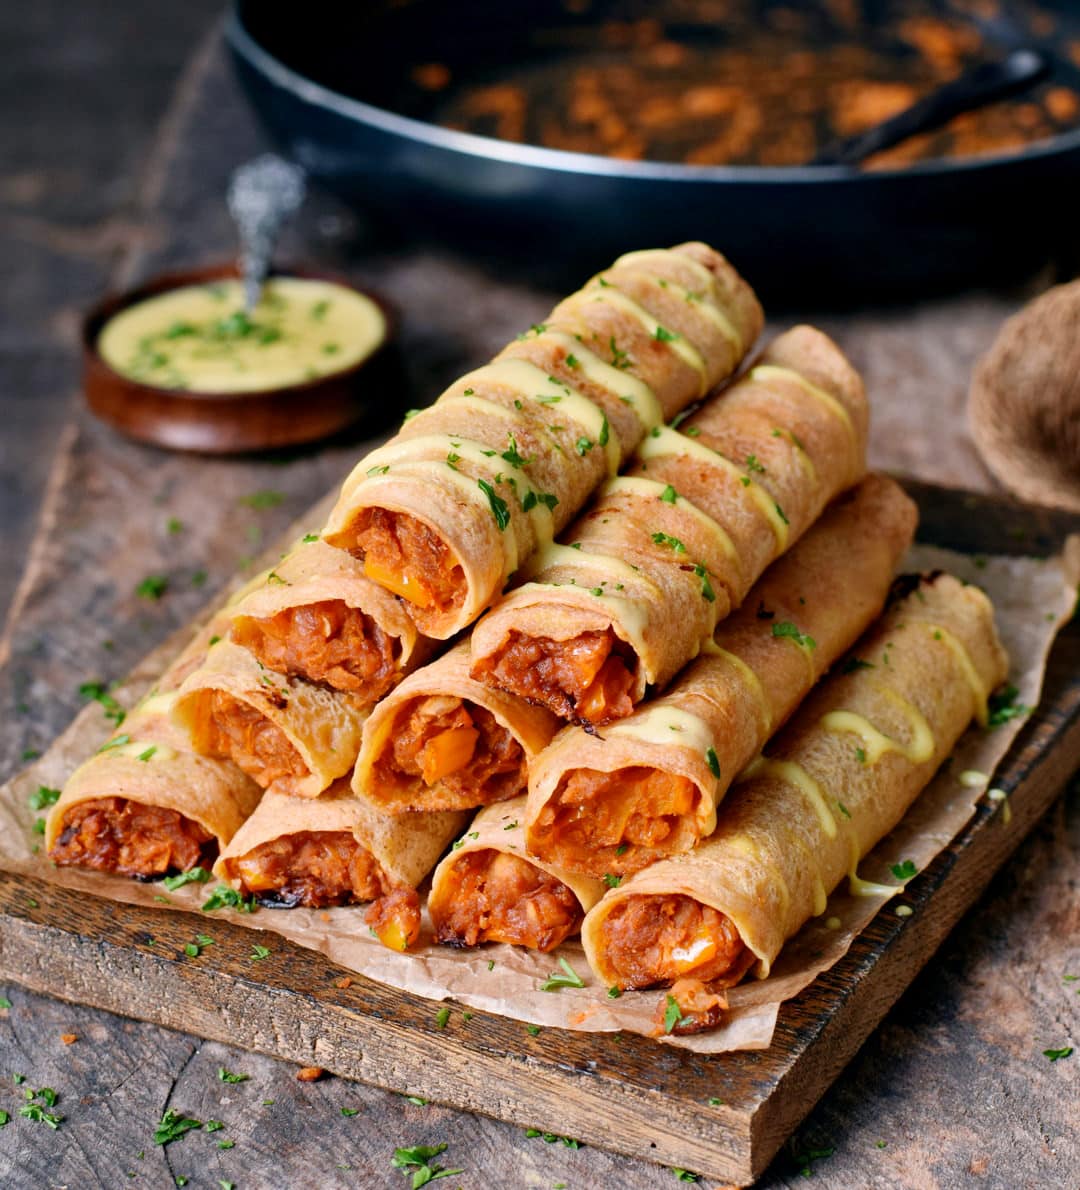 Gluten-free Buffalo chickpea taquitos with vegan cheese drizzle